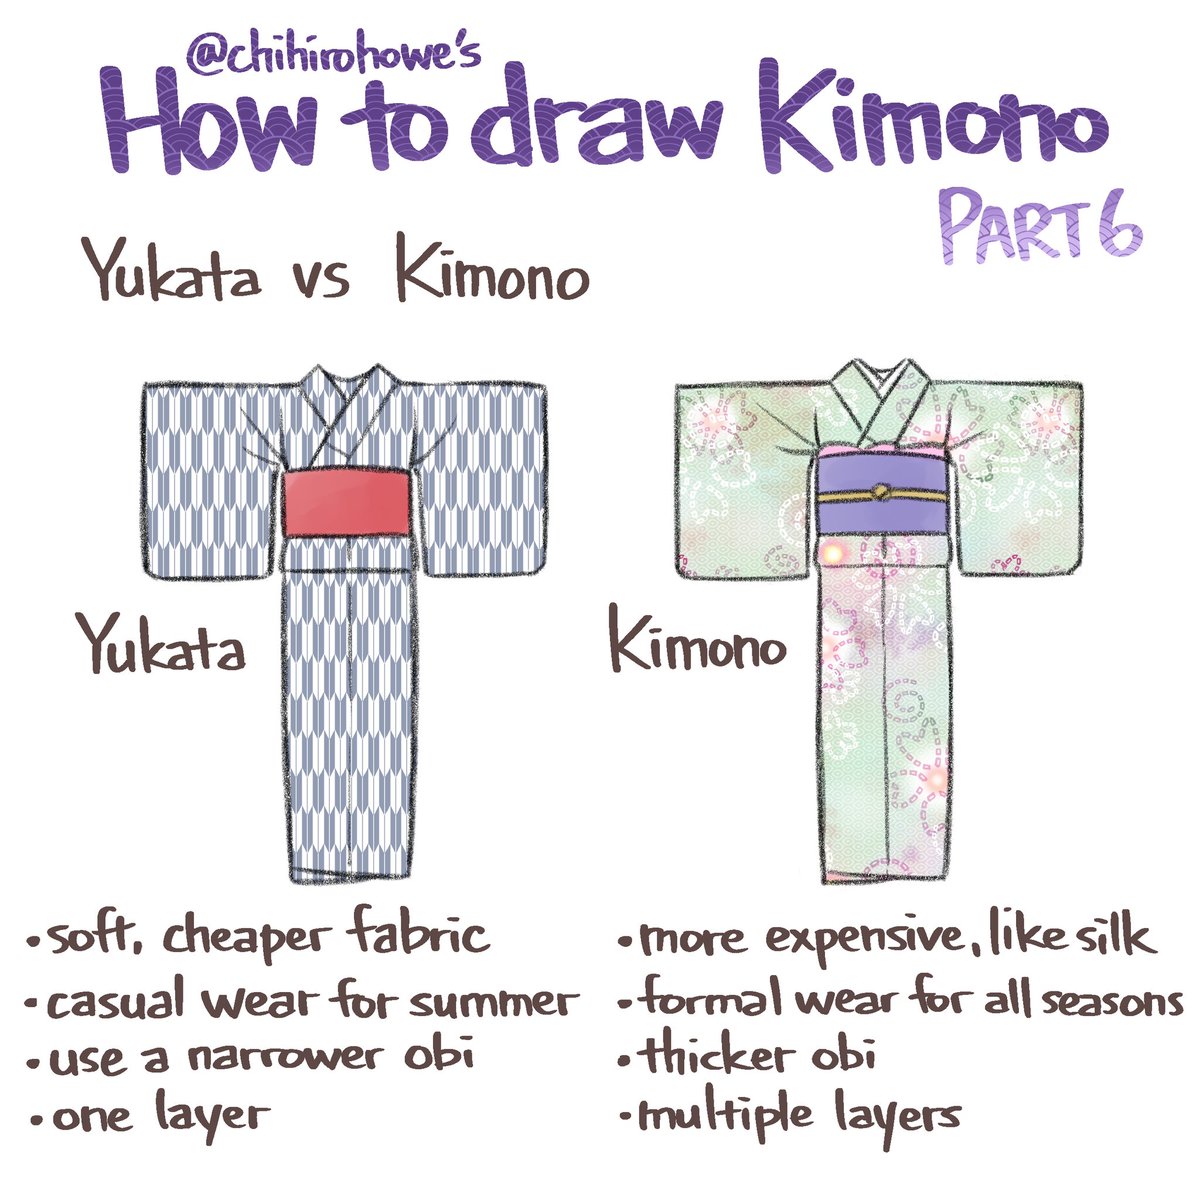  #kimono Part 6: Yukata vs KimonoYukata is casual, kimono is formal.Yukata is made as a summer wear, so the fabric is thinner and lighter. Women enjoy more western decorations for Yukata (like bows and laces)Kimono is more expensive and there are more accessories and layers.